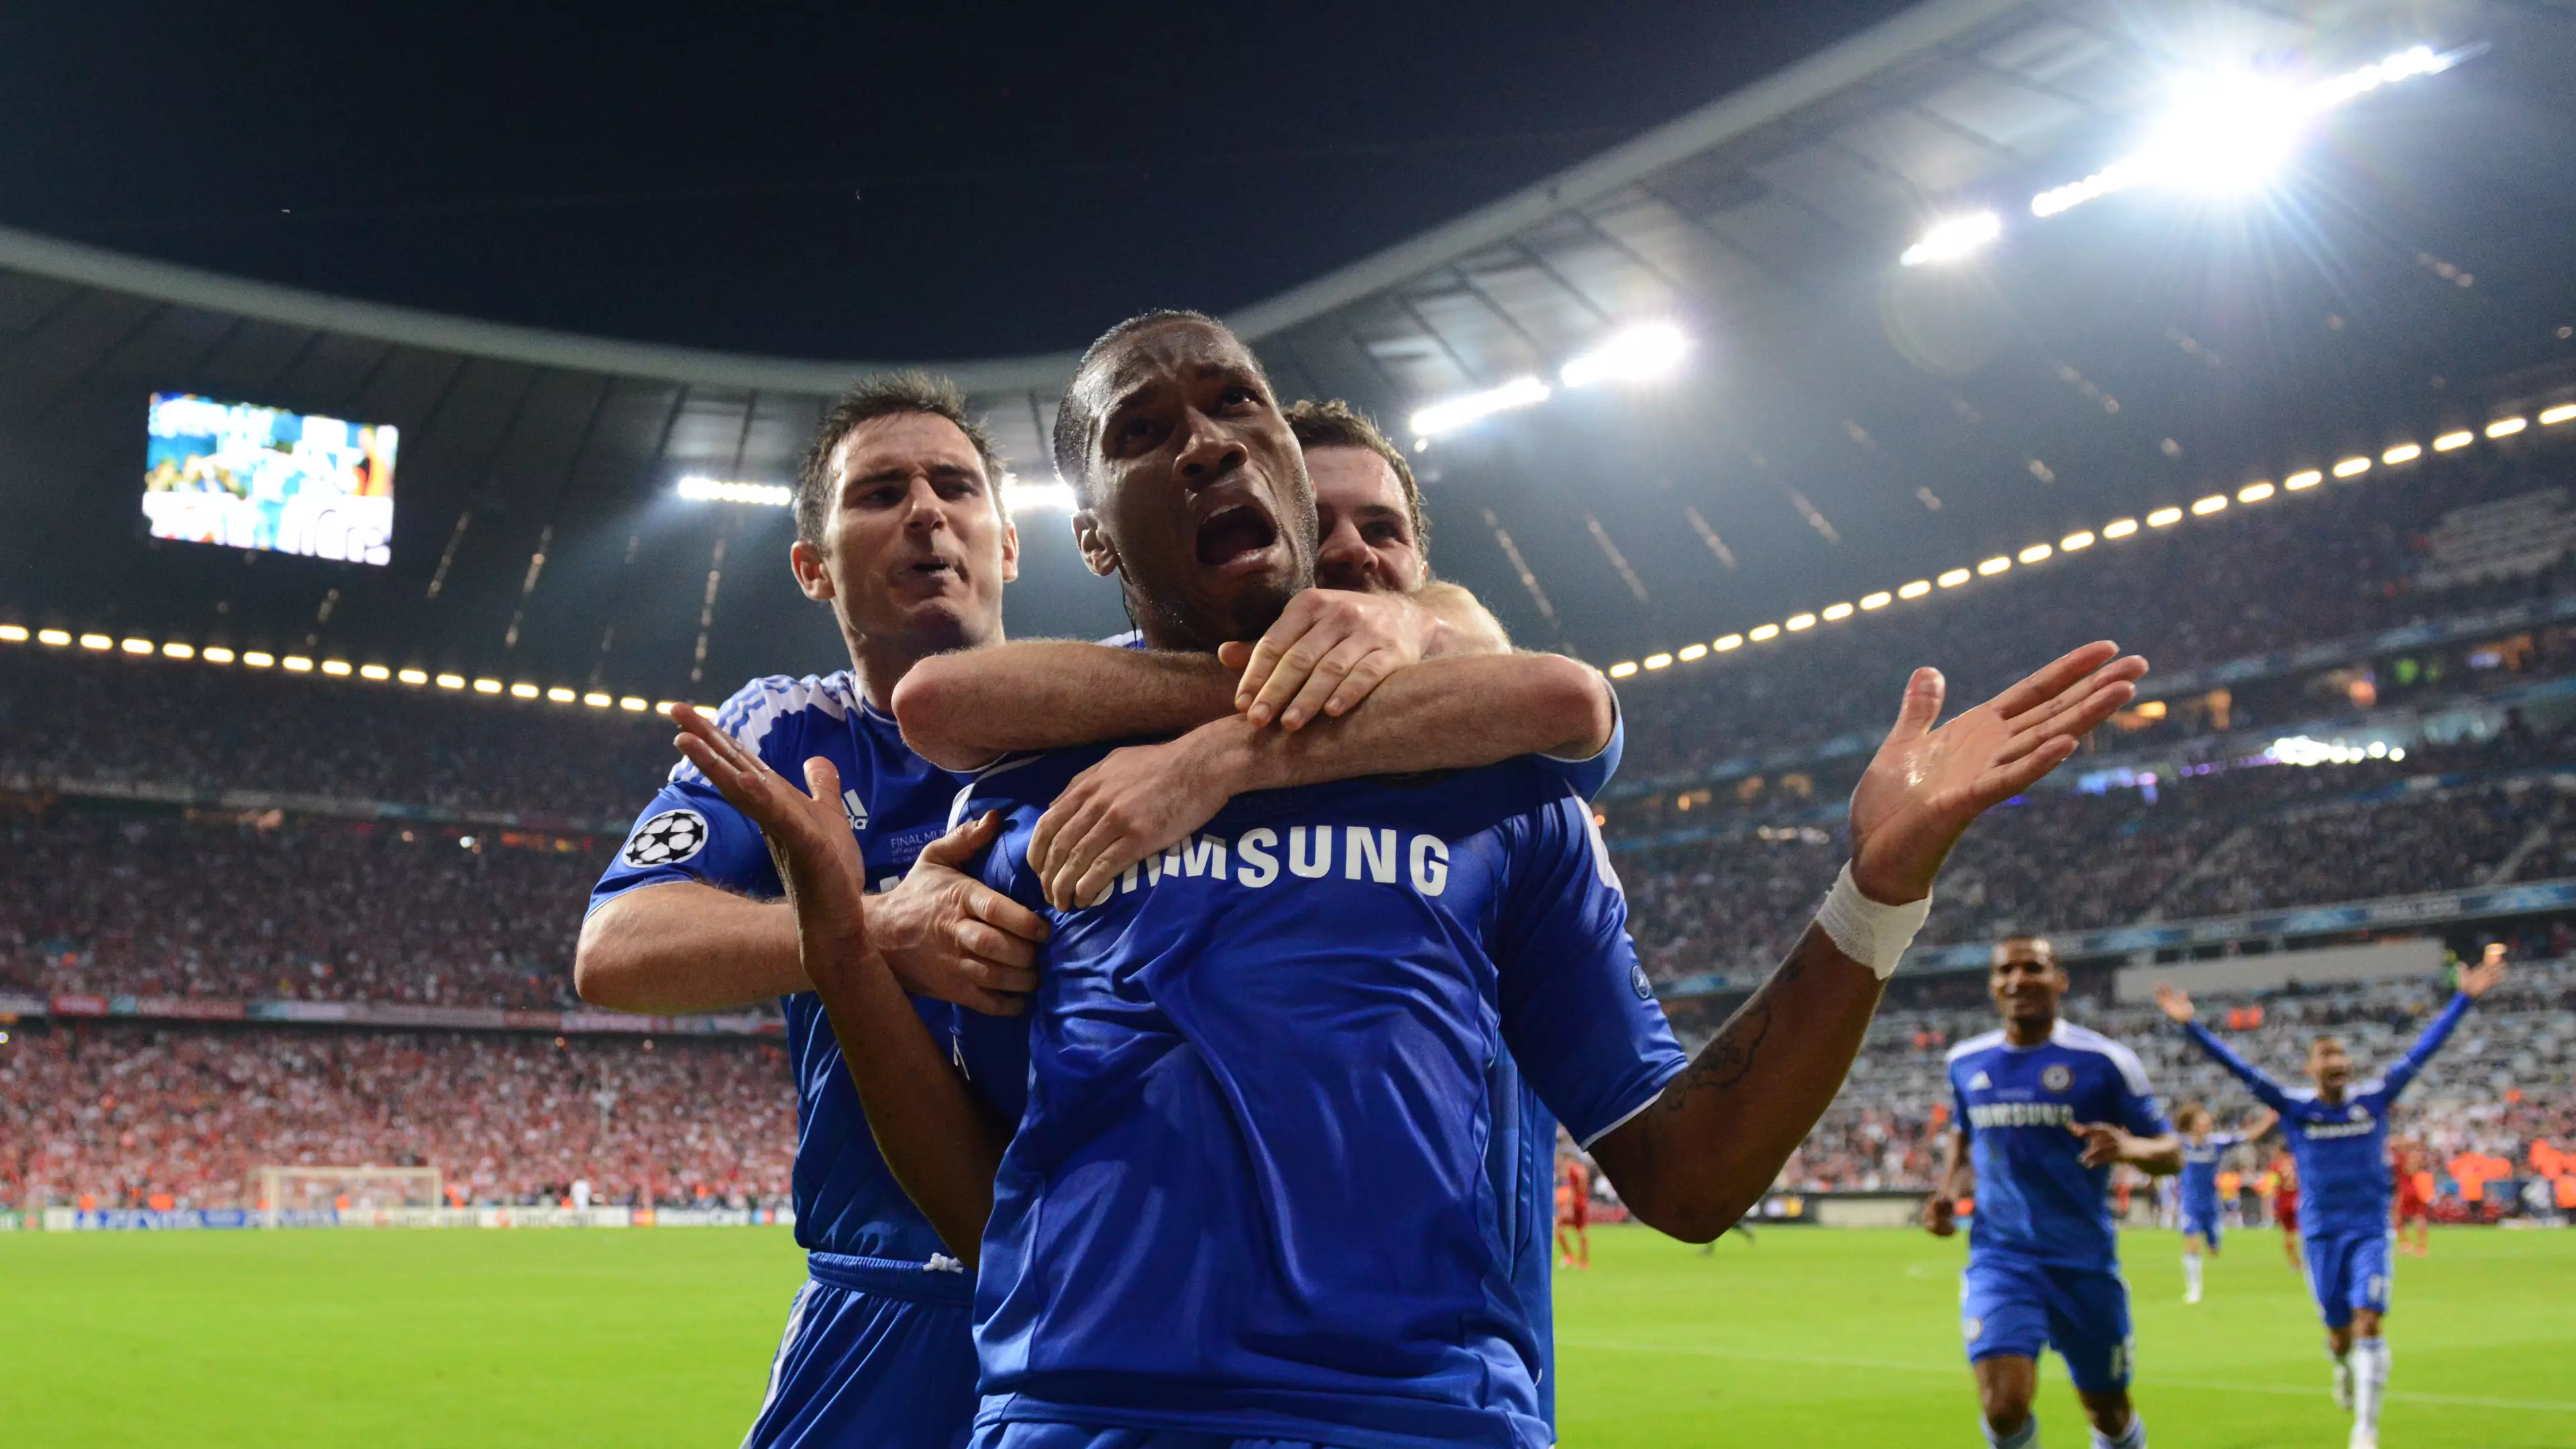 Didier Drogba Confirms He Will Retire At The End Of The Season